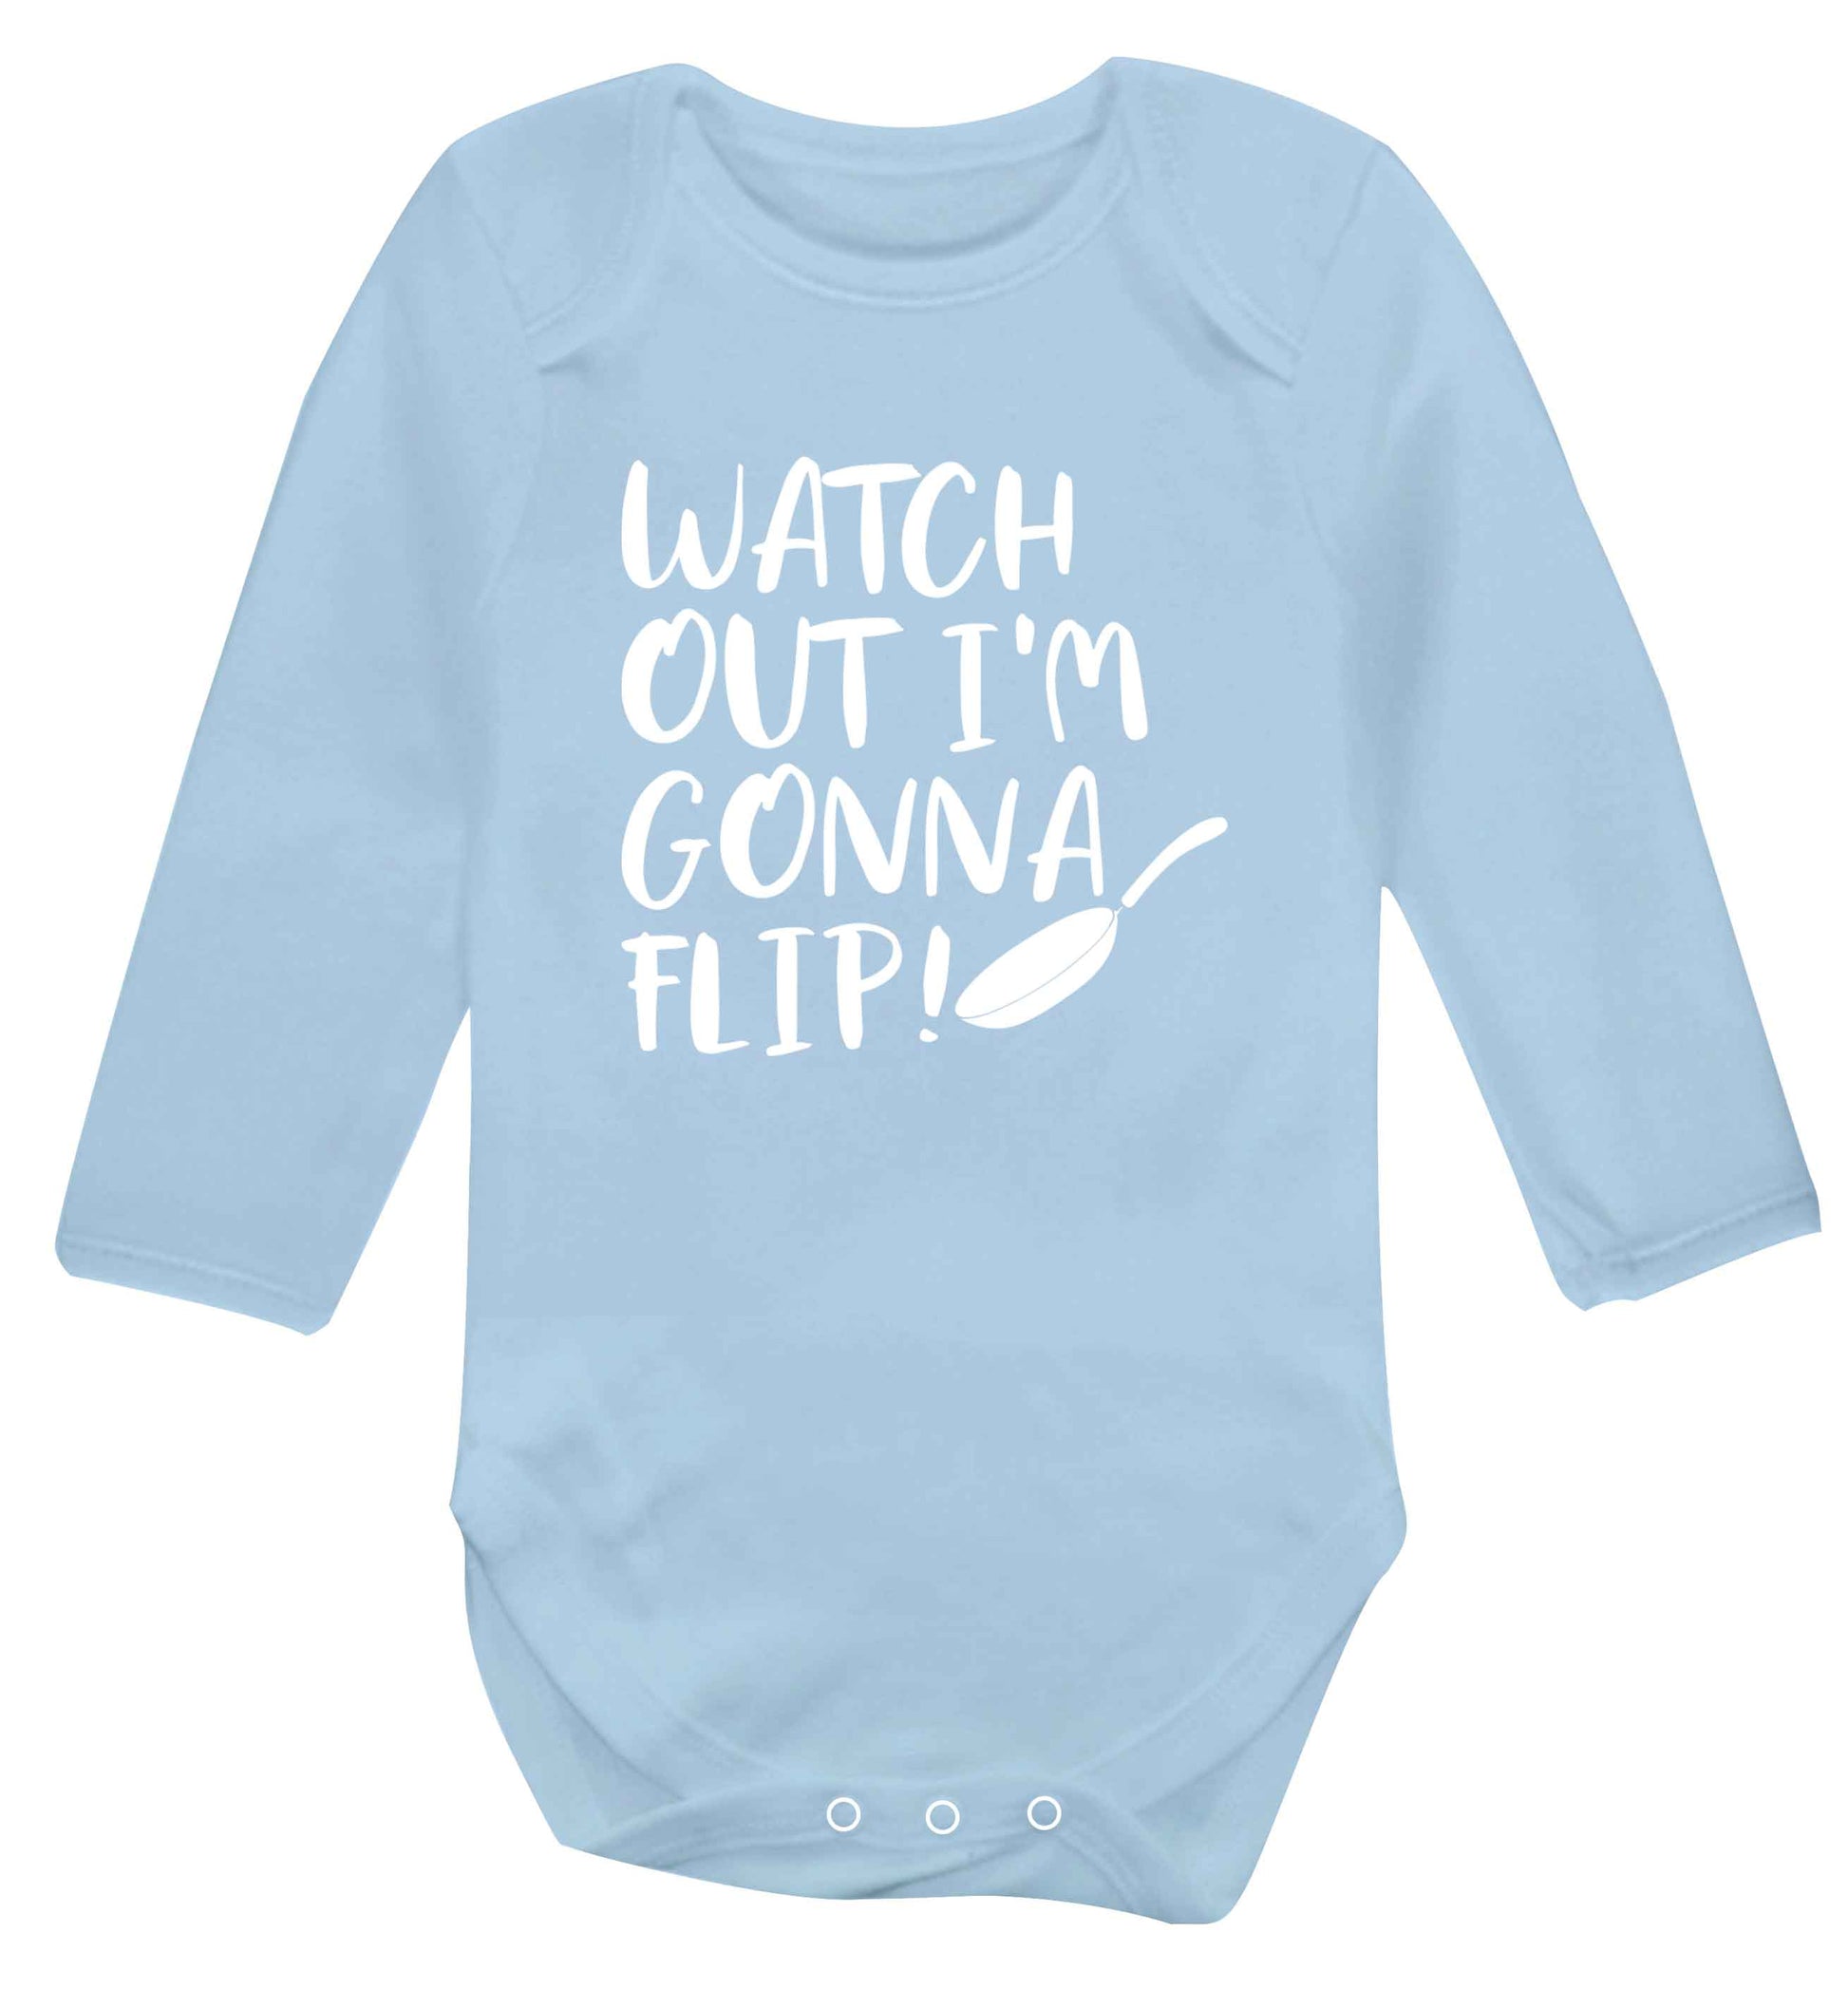 Watch out I'm gonna flip! baby vest long sleeved pale blue 6-12 months